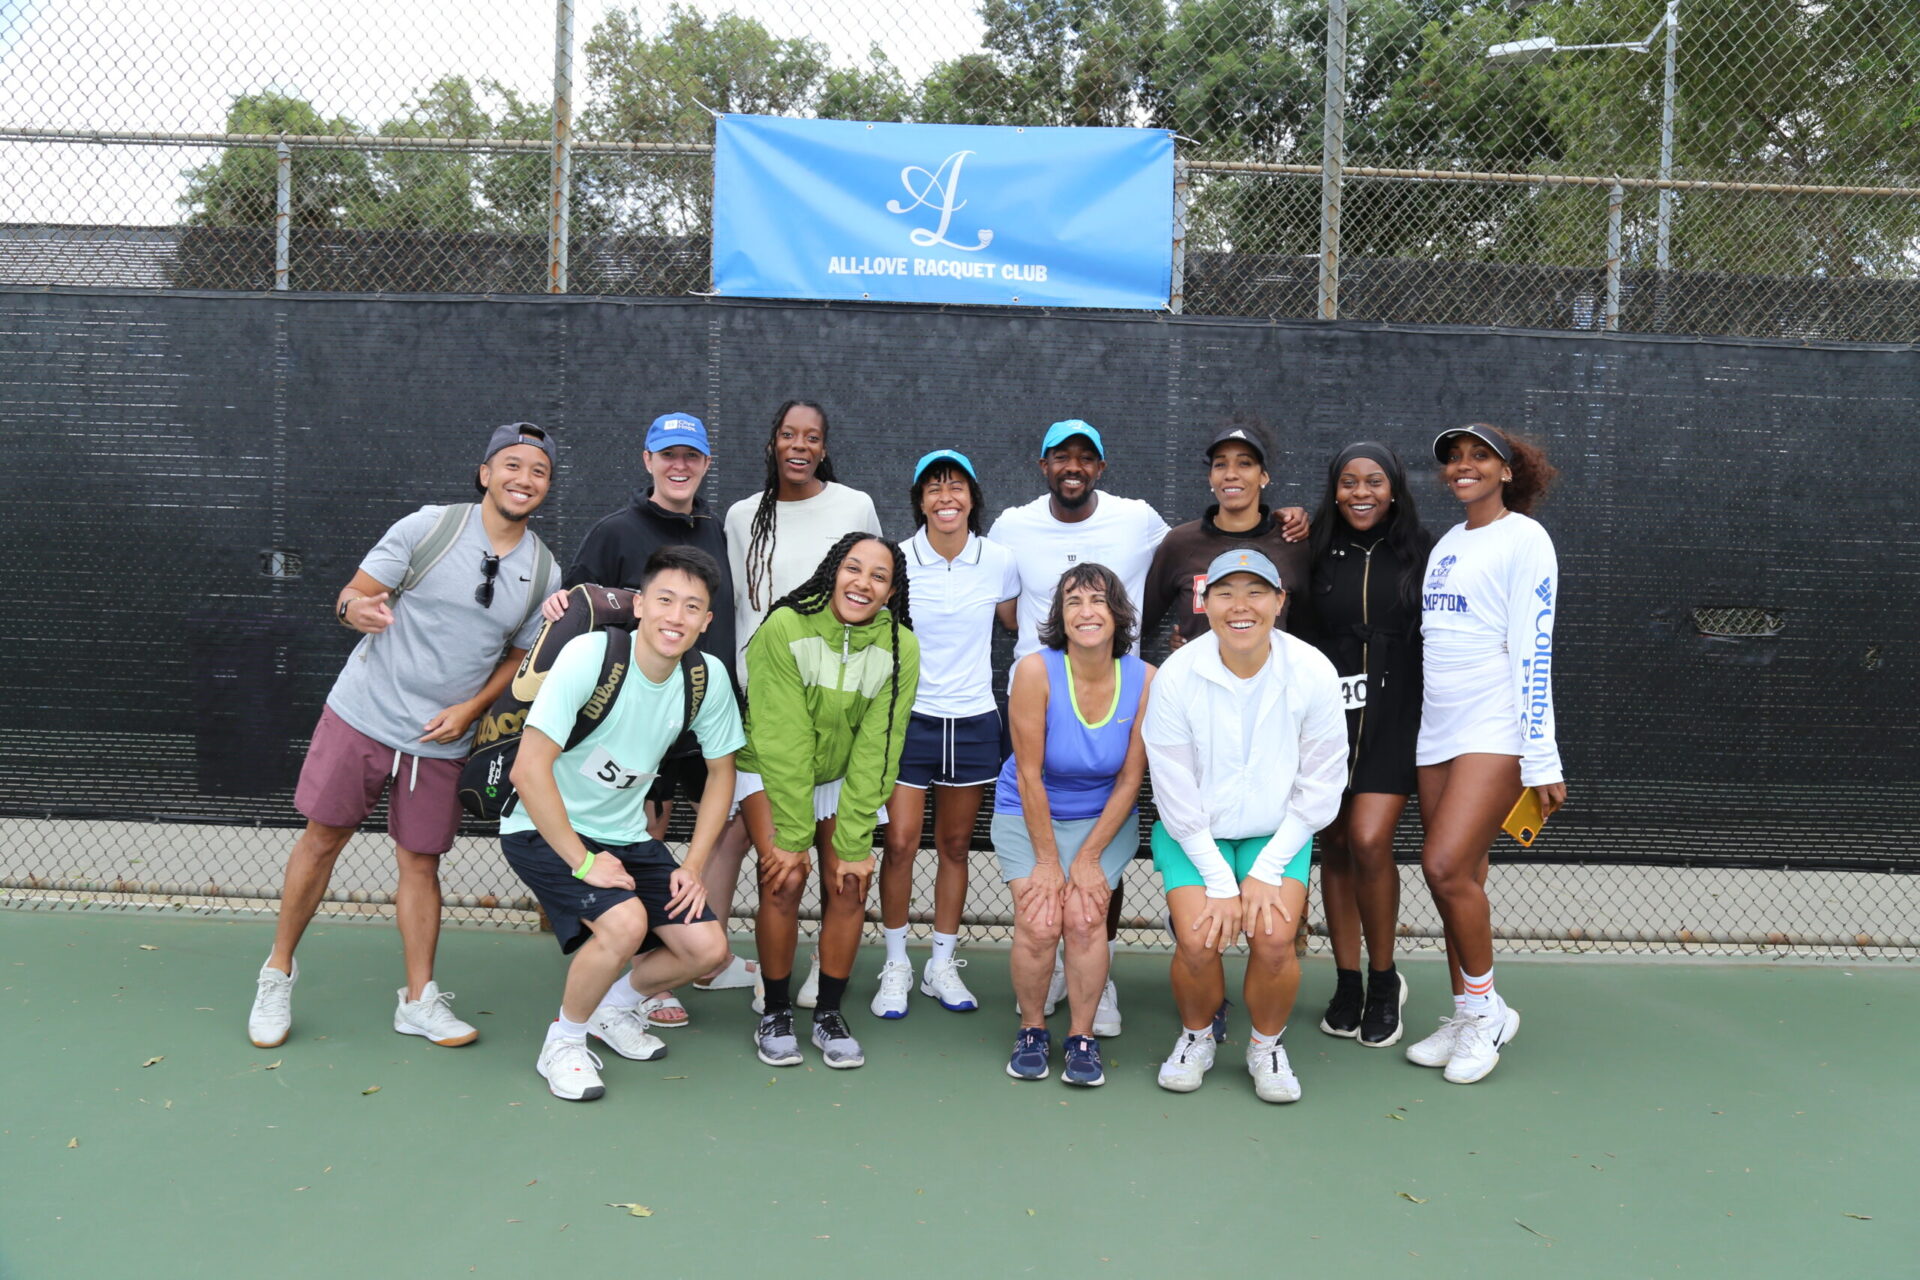 Racquet Club Brings Inclusivity To Tennis And Pickleball, Meet The Woman Behind The Movement